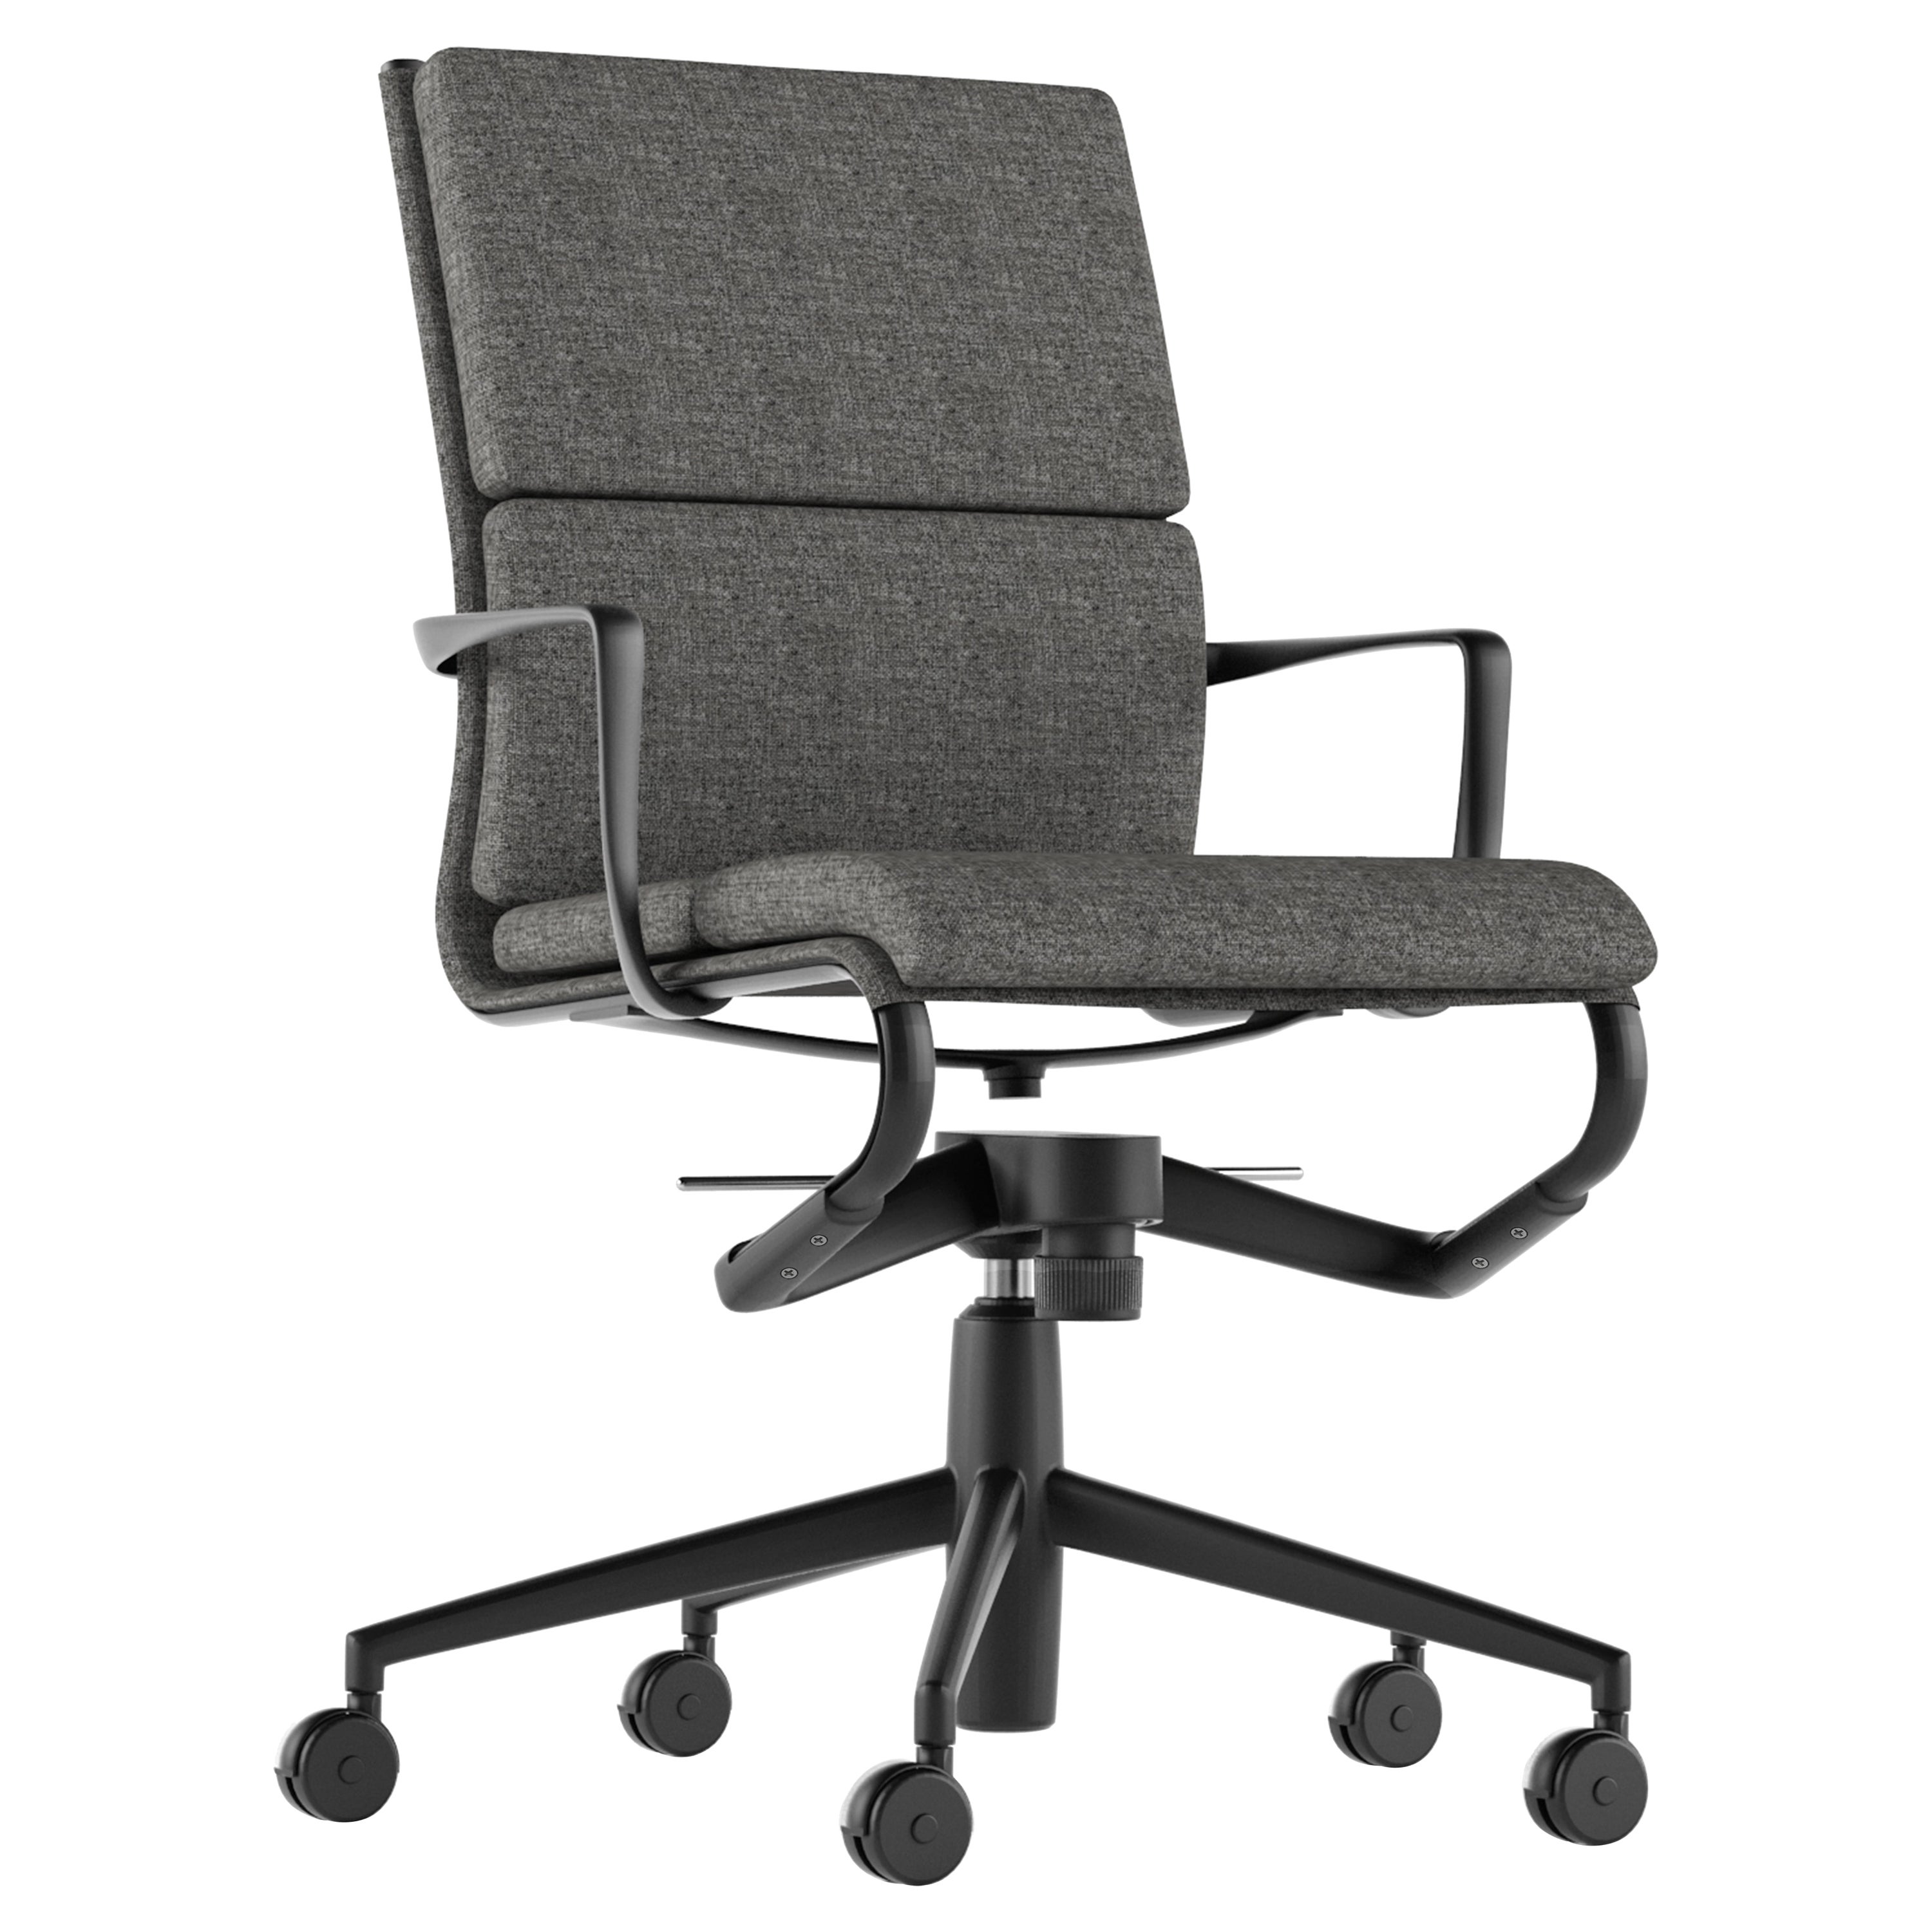 Alias 453 Rollingframe+ Tilt 47 Soft Chair in Grey with Lacquered Aluminum Frame For Sale